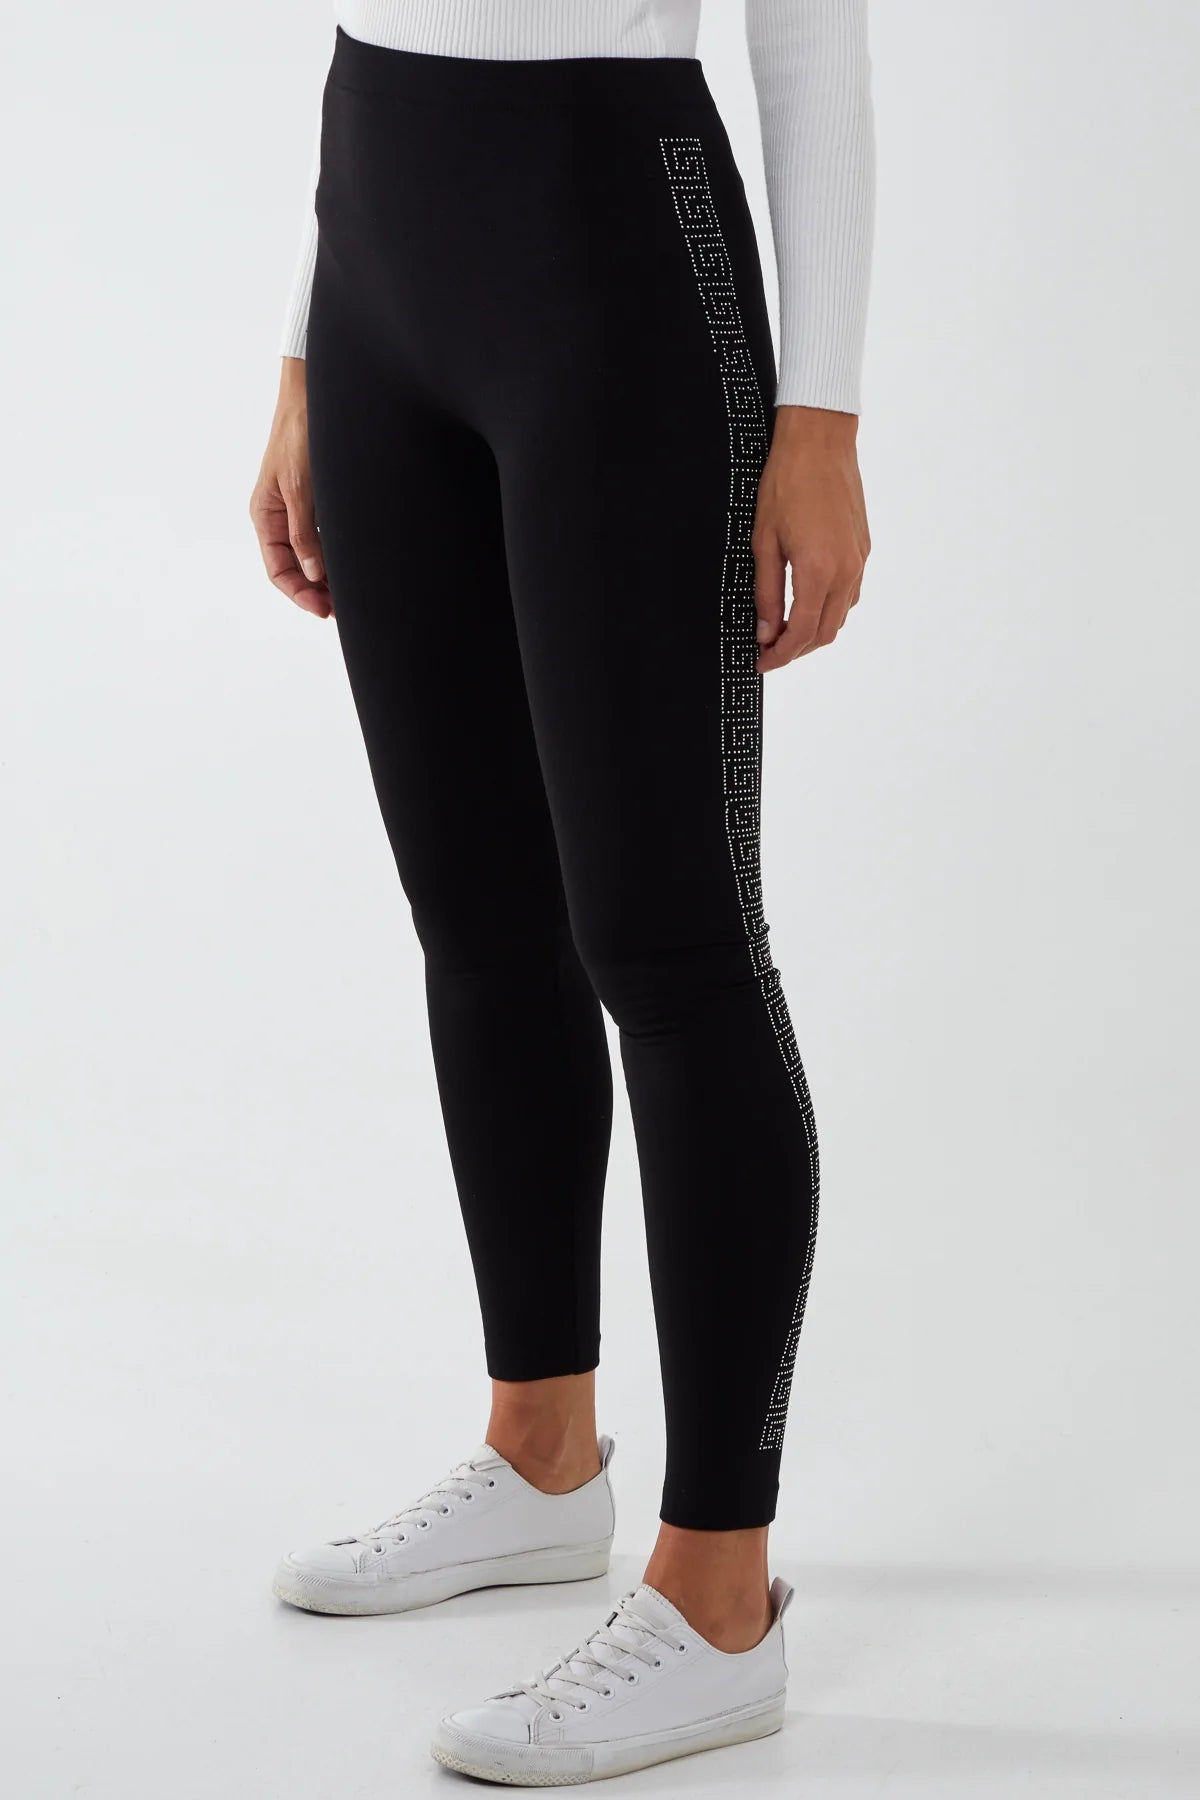 One Size Fits Most Fleece Lined Legging-Black